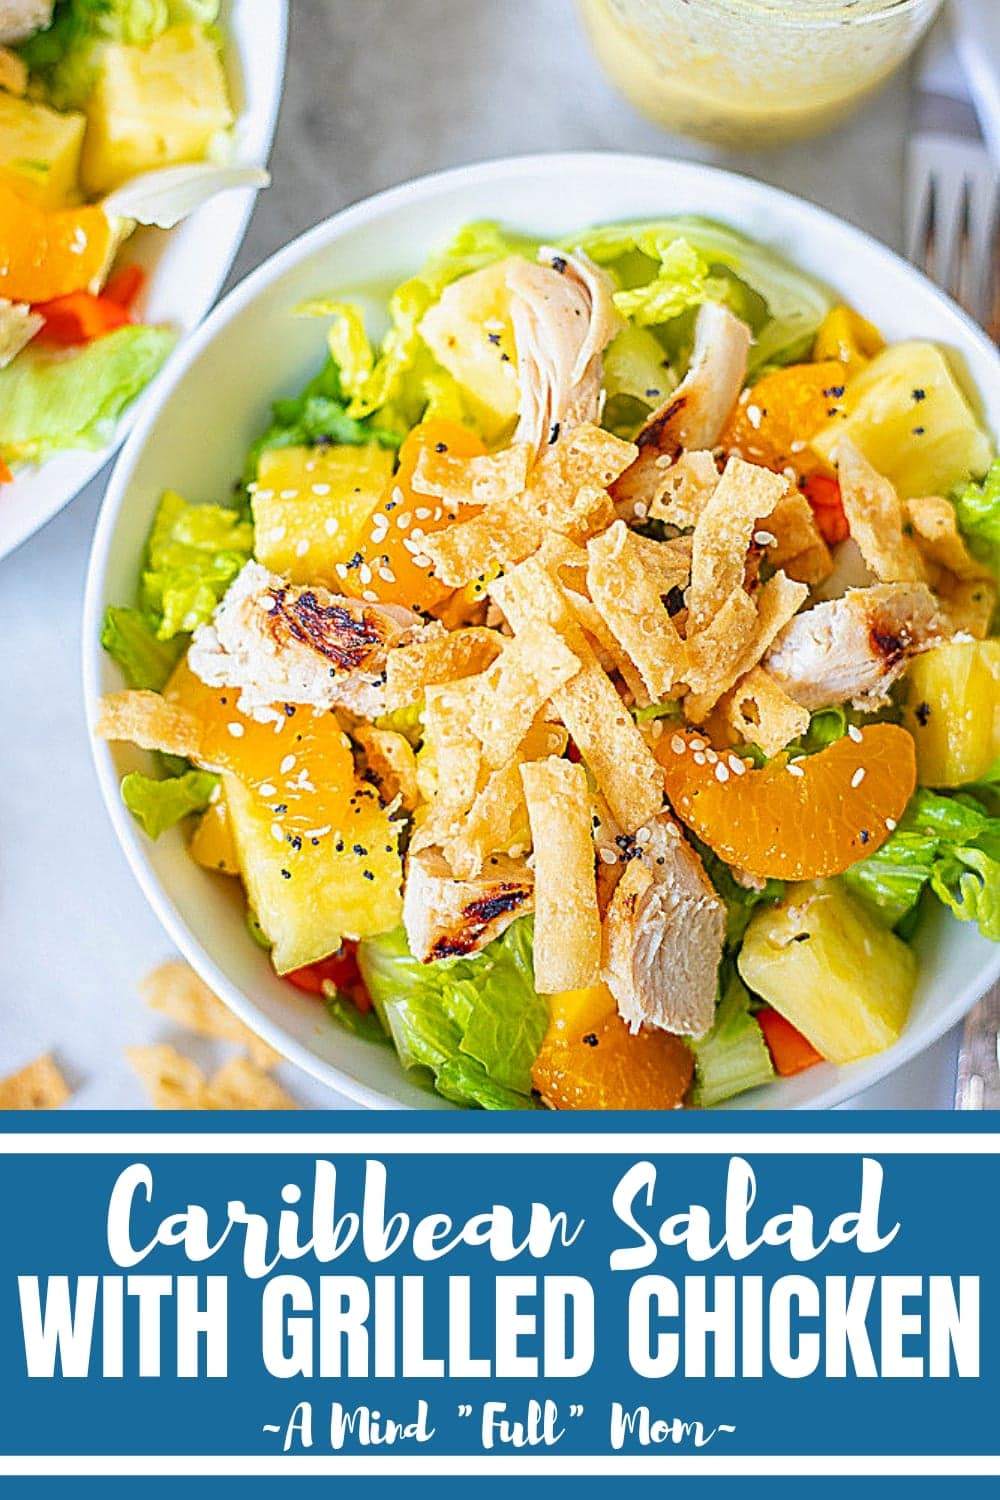 Take a trip to the tropics with this easy Caribbean Salad! Grilled chicken is paired with mangoes, pineapple, and an orange vinaigrette for a copycat version of Cheesecake Factory's Luau Salad.